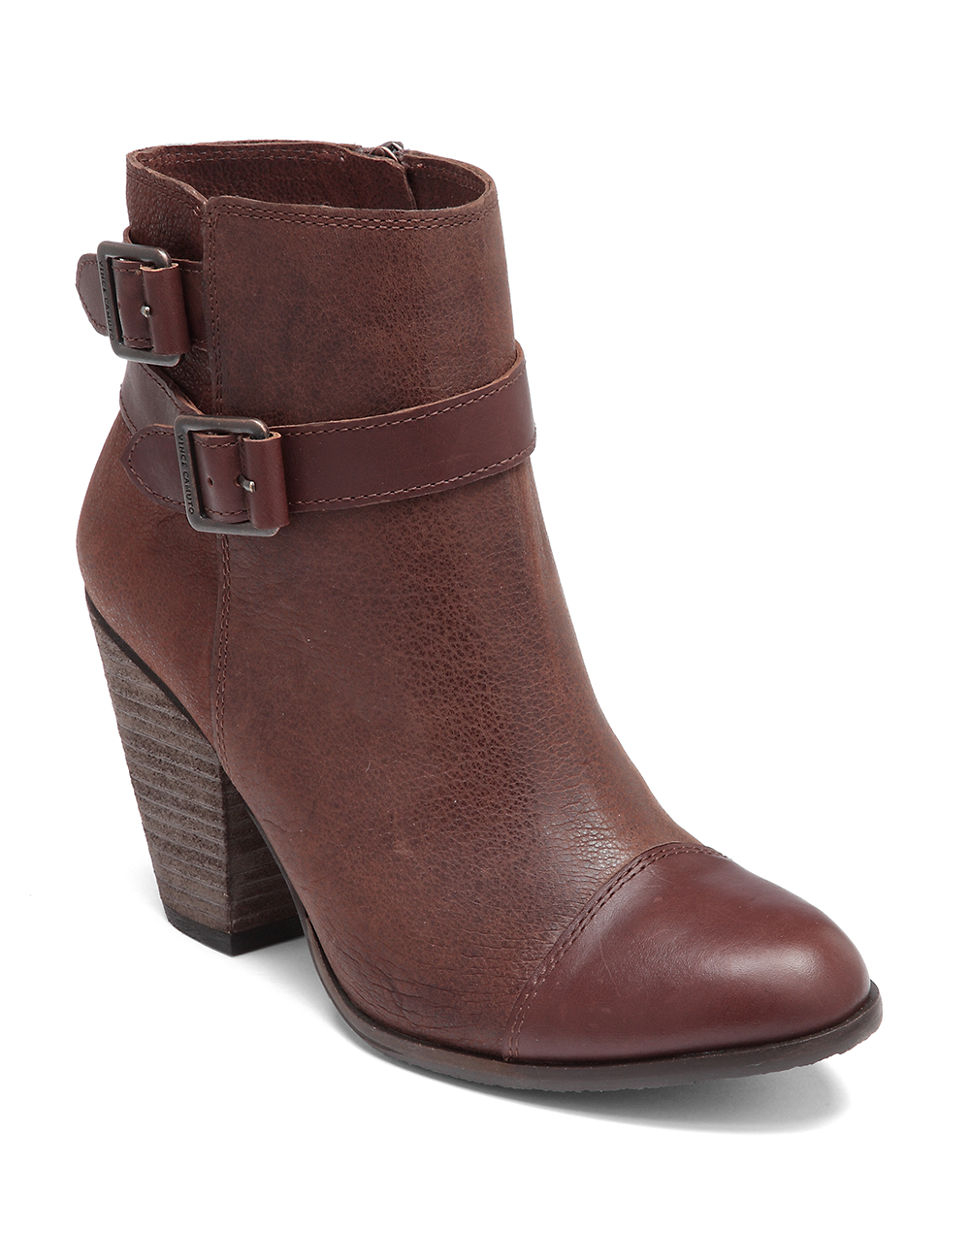 Vince Camuto Hasia Suede Ankle Boots in Brown | Lyst